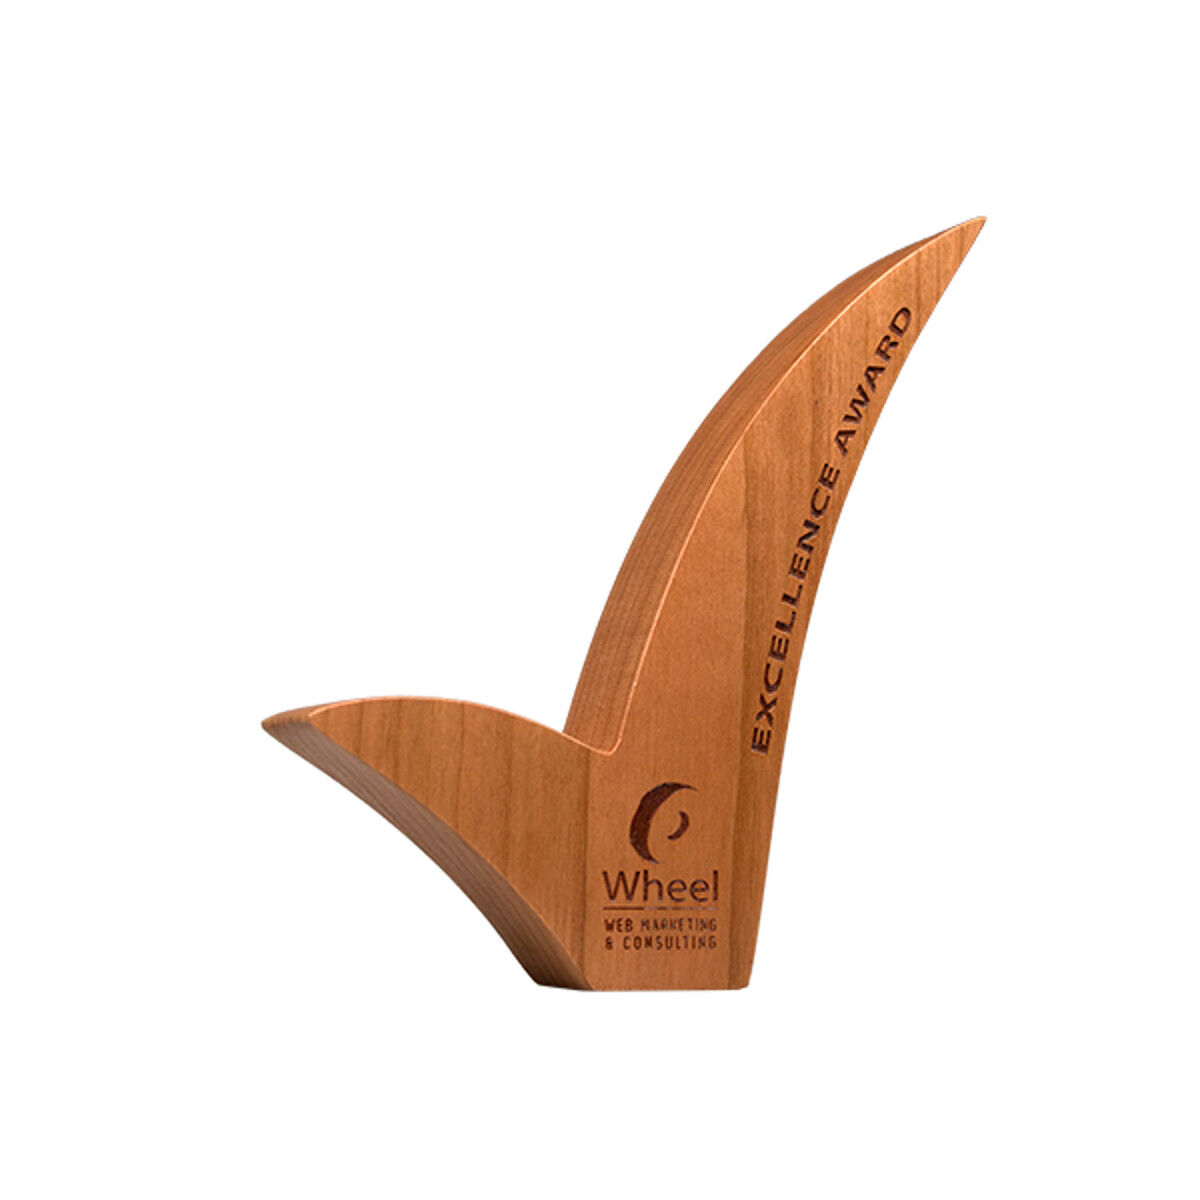 Real Wood Awards in Popular Shapes